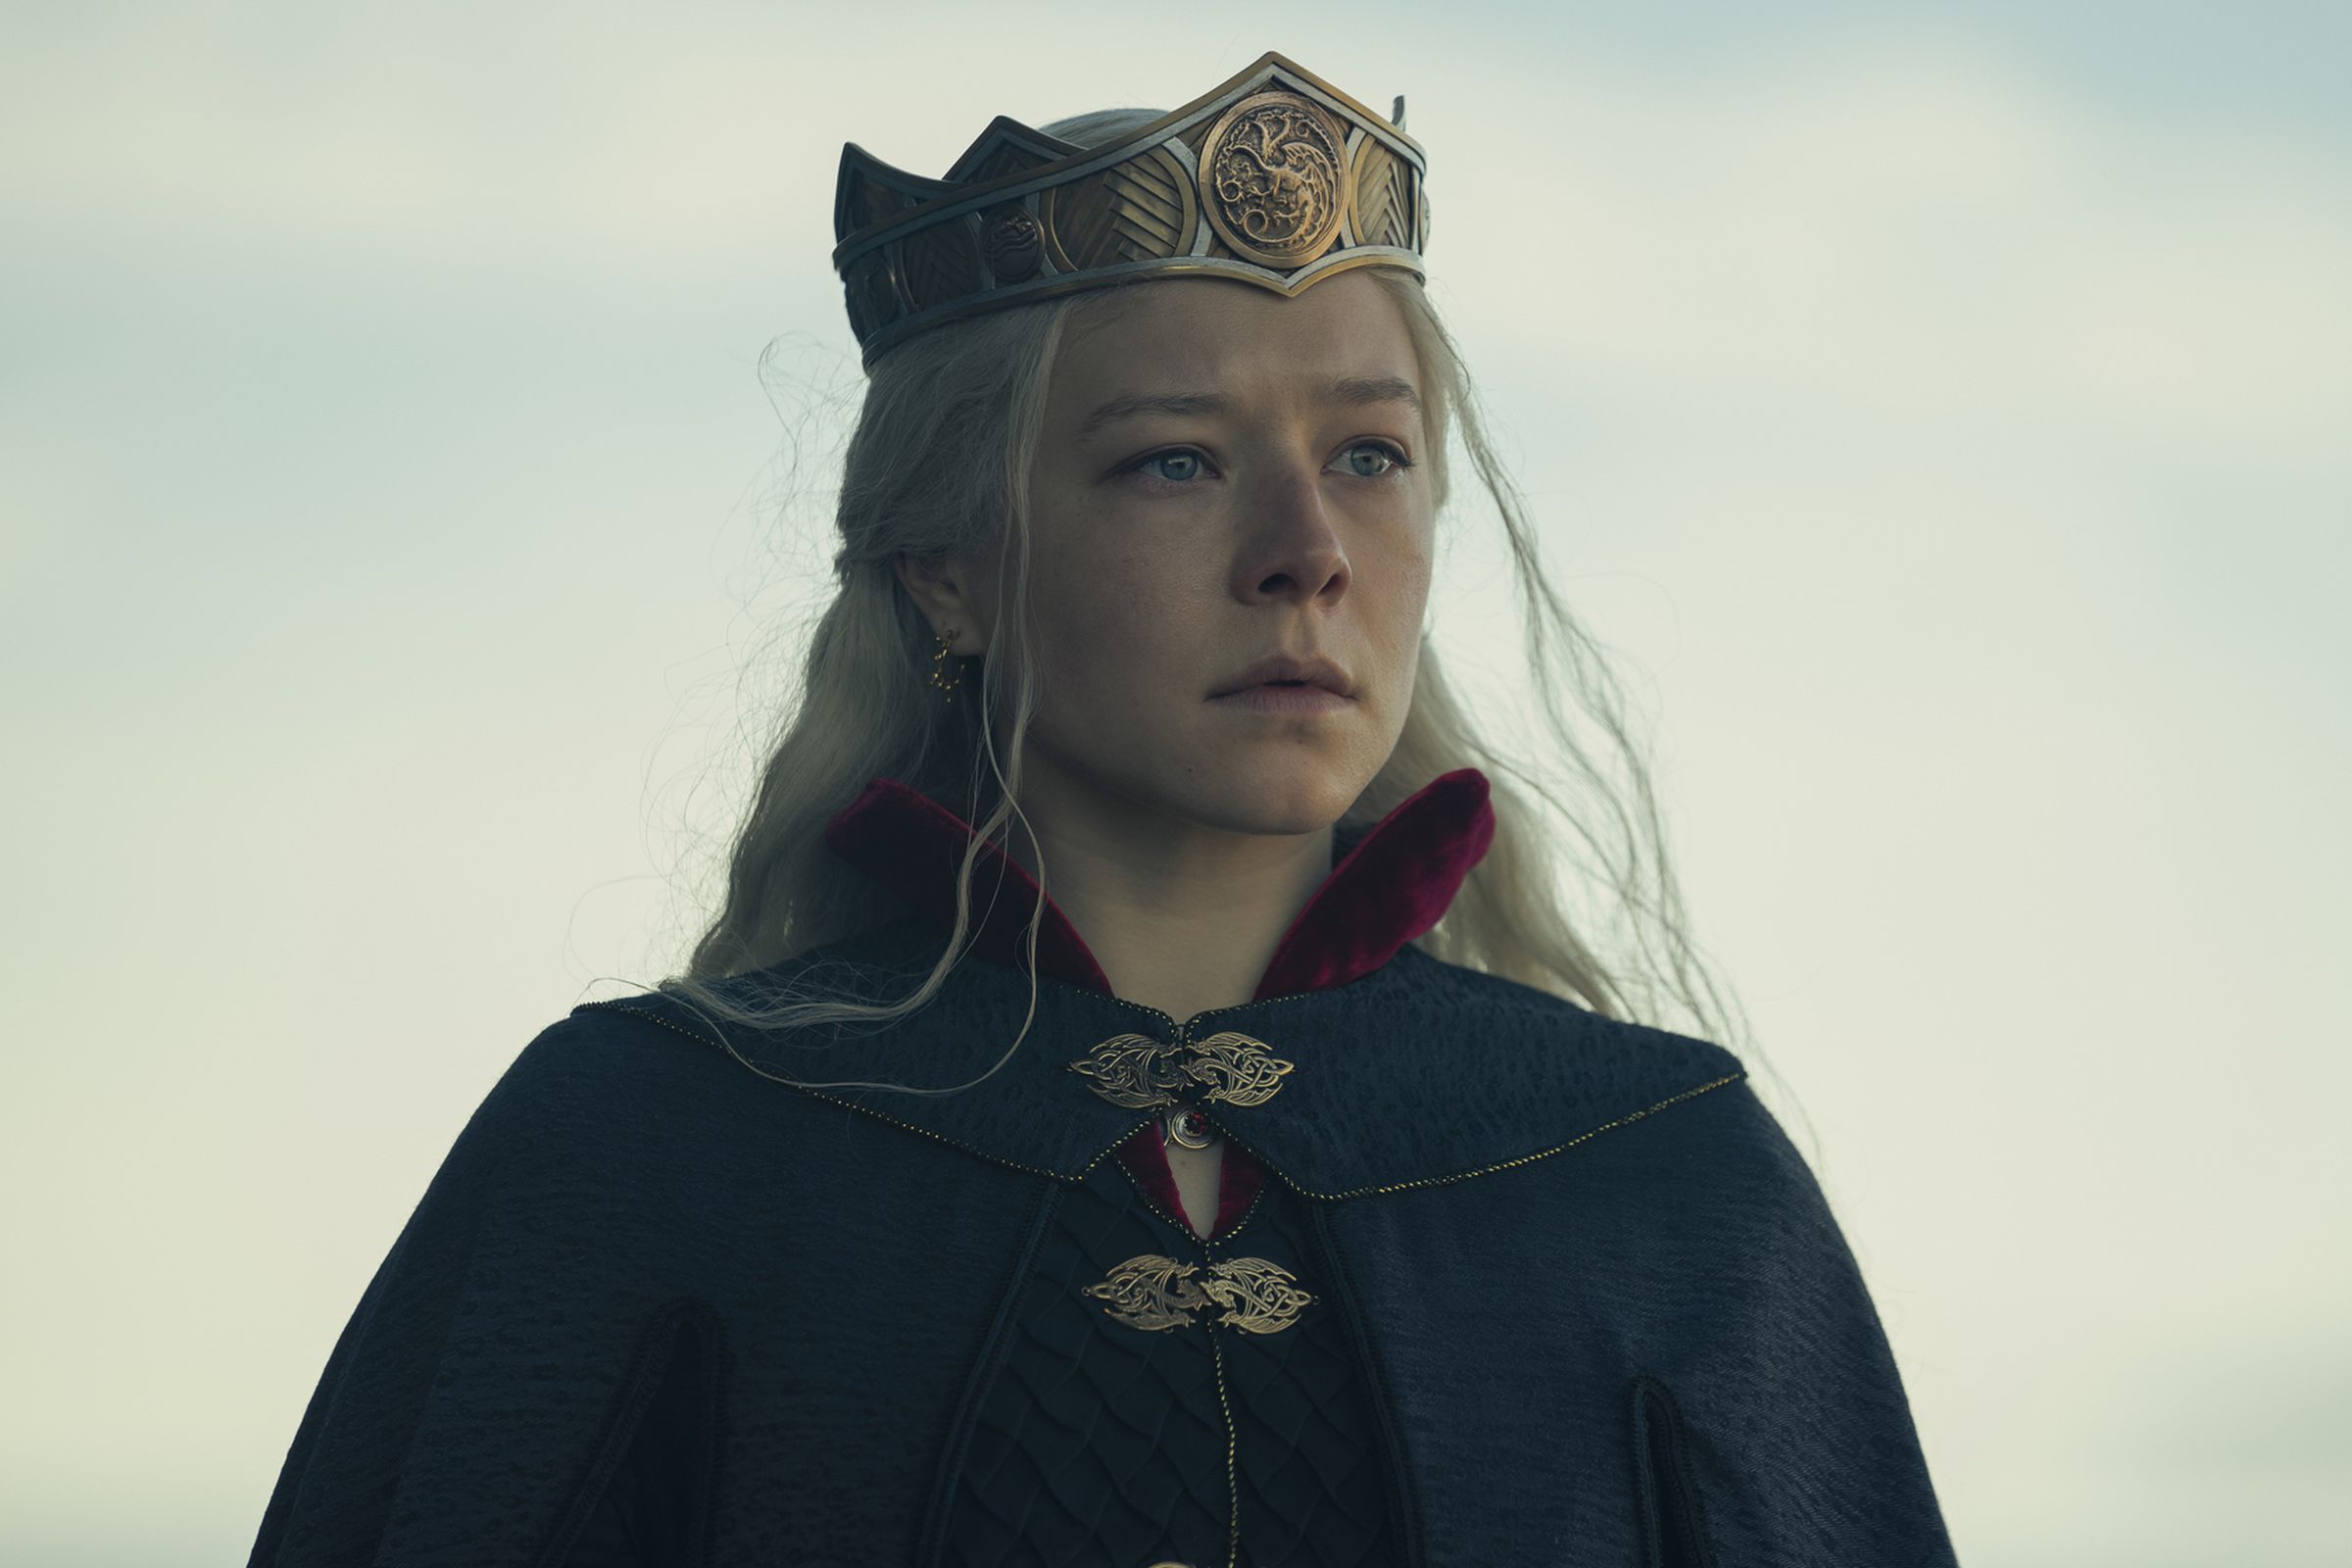 A platinum blonde wearing a navy blue ceremonial cloak, a crown, and a deadened facial expression.